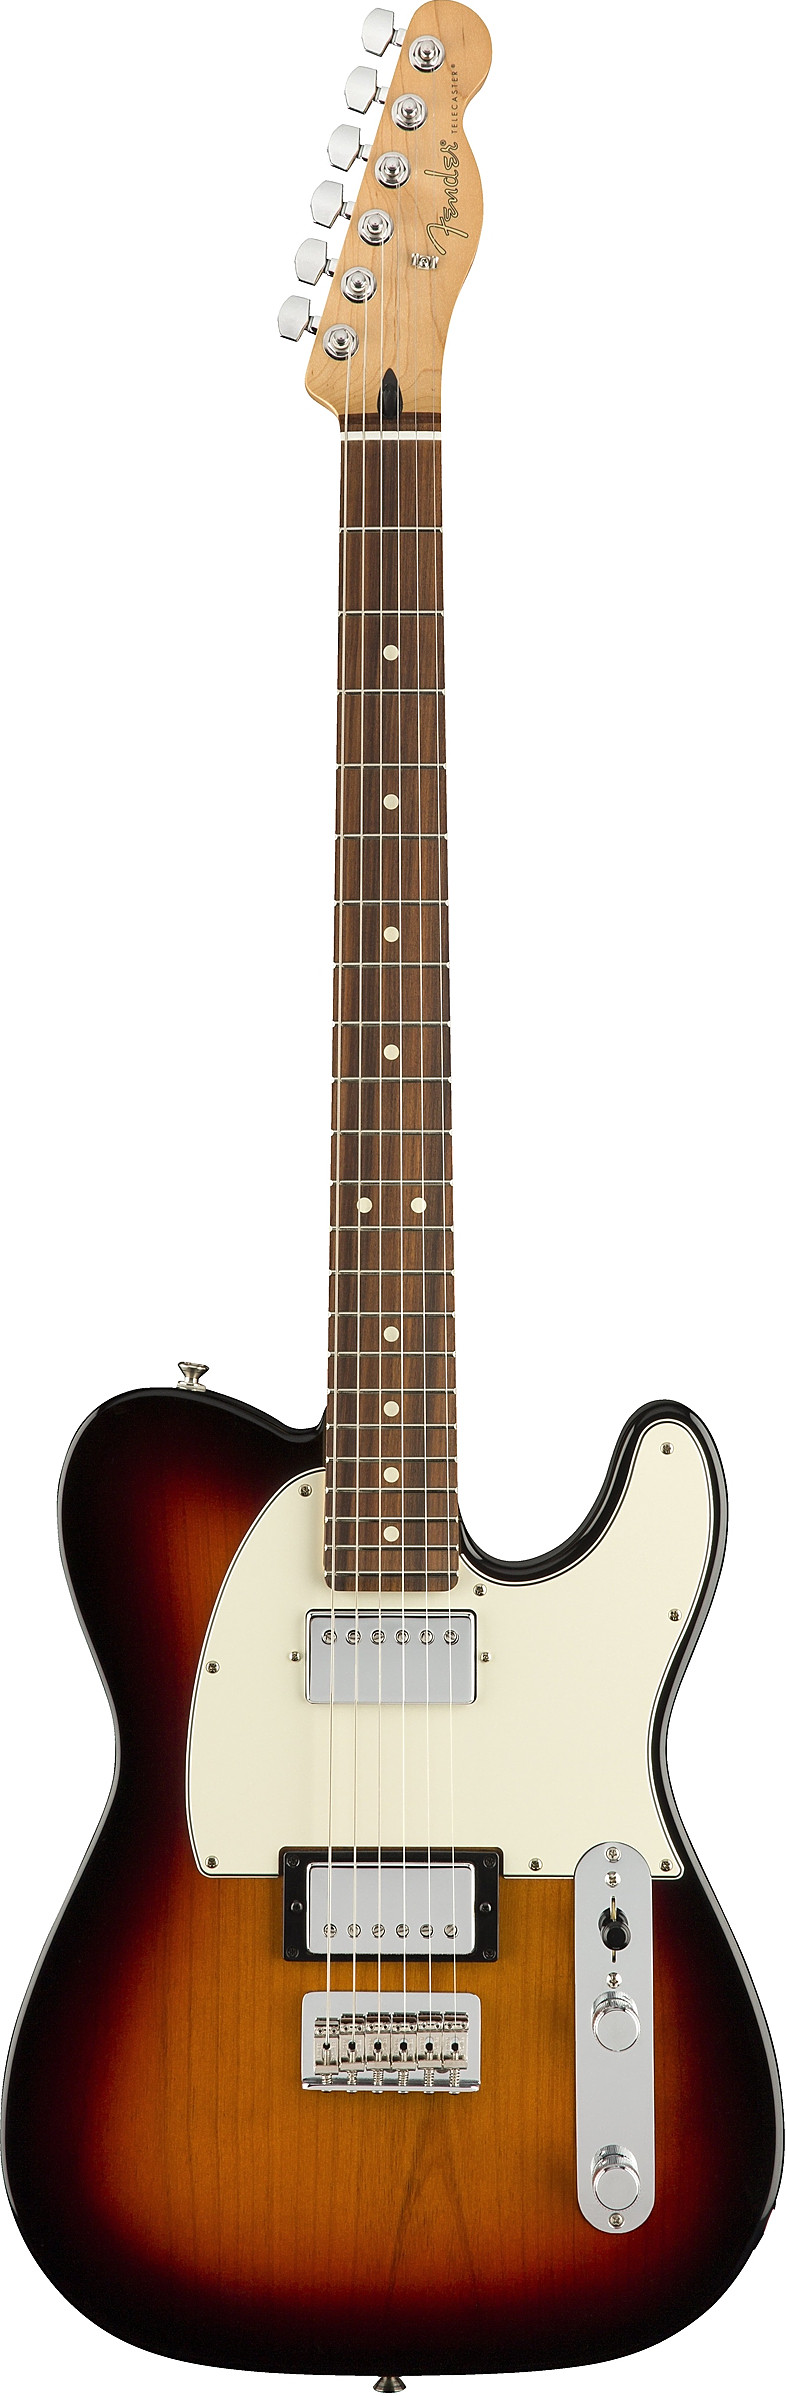 Player Telecaster HH by Fender